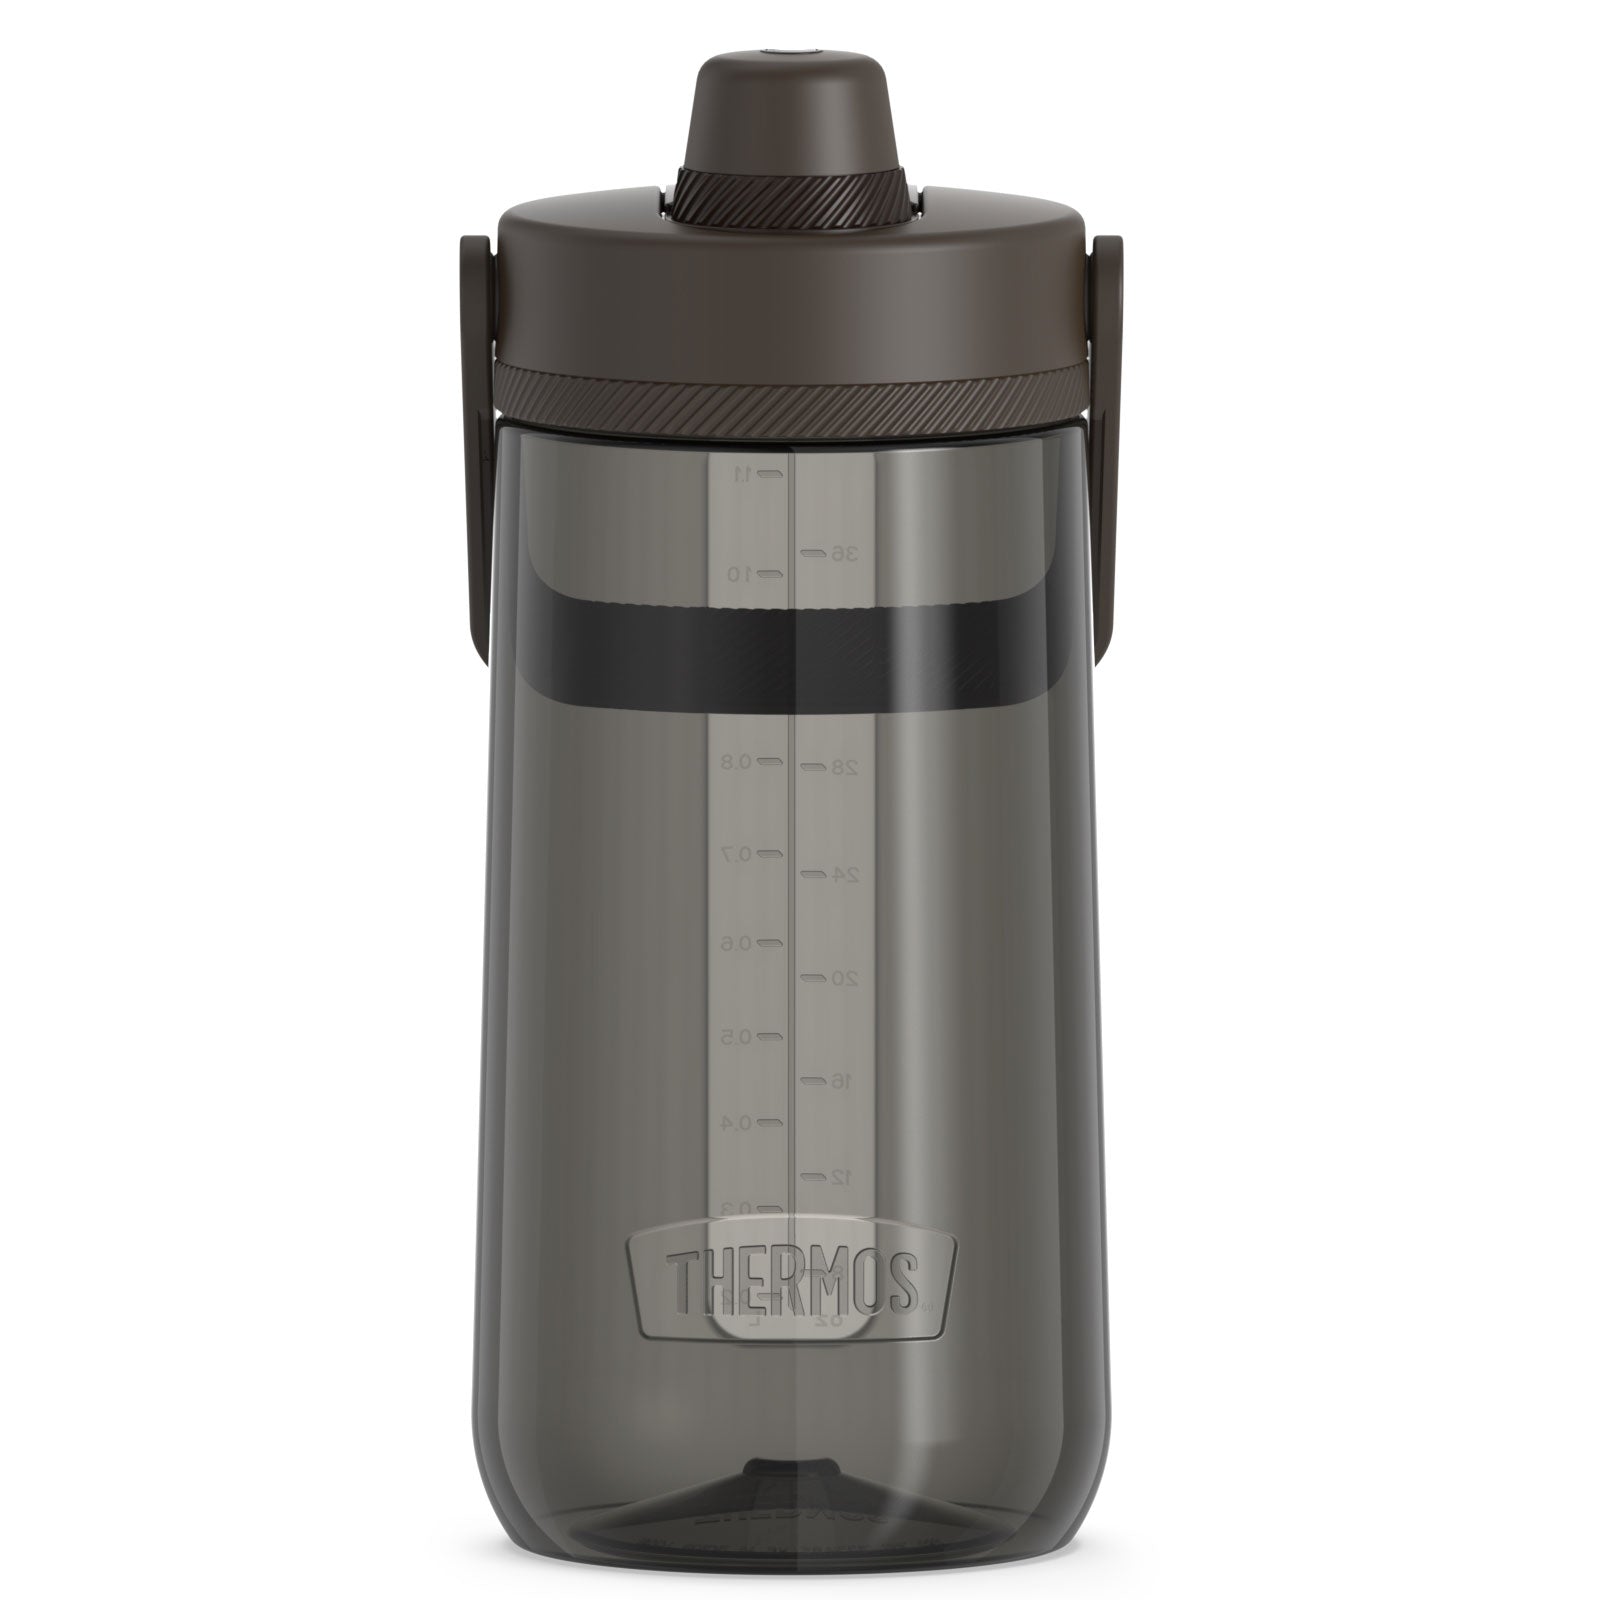 Thermos 24 oz. Alta Insulated Stainless Steel Hydration Bottle Black